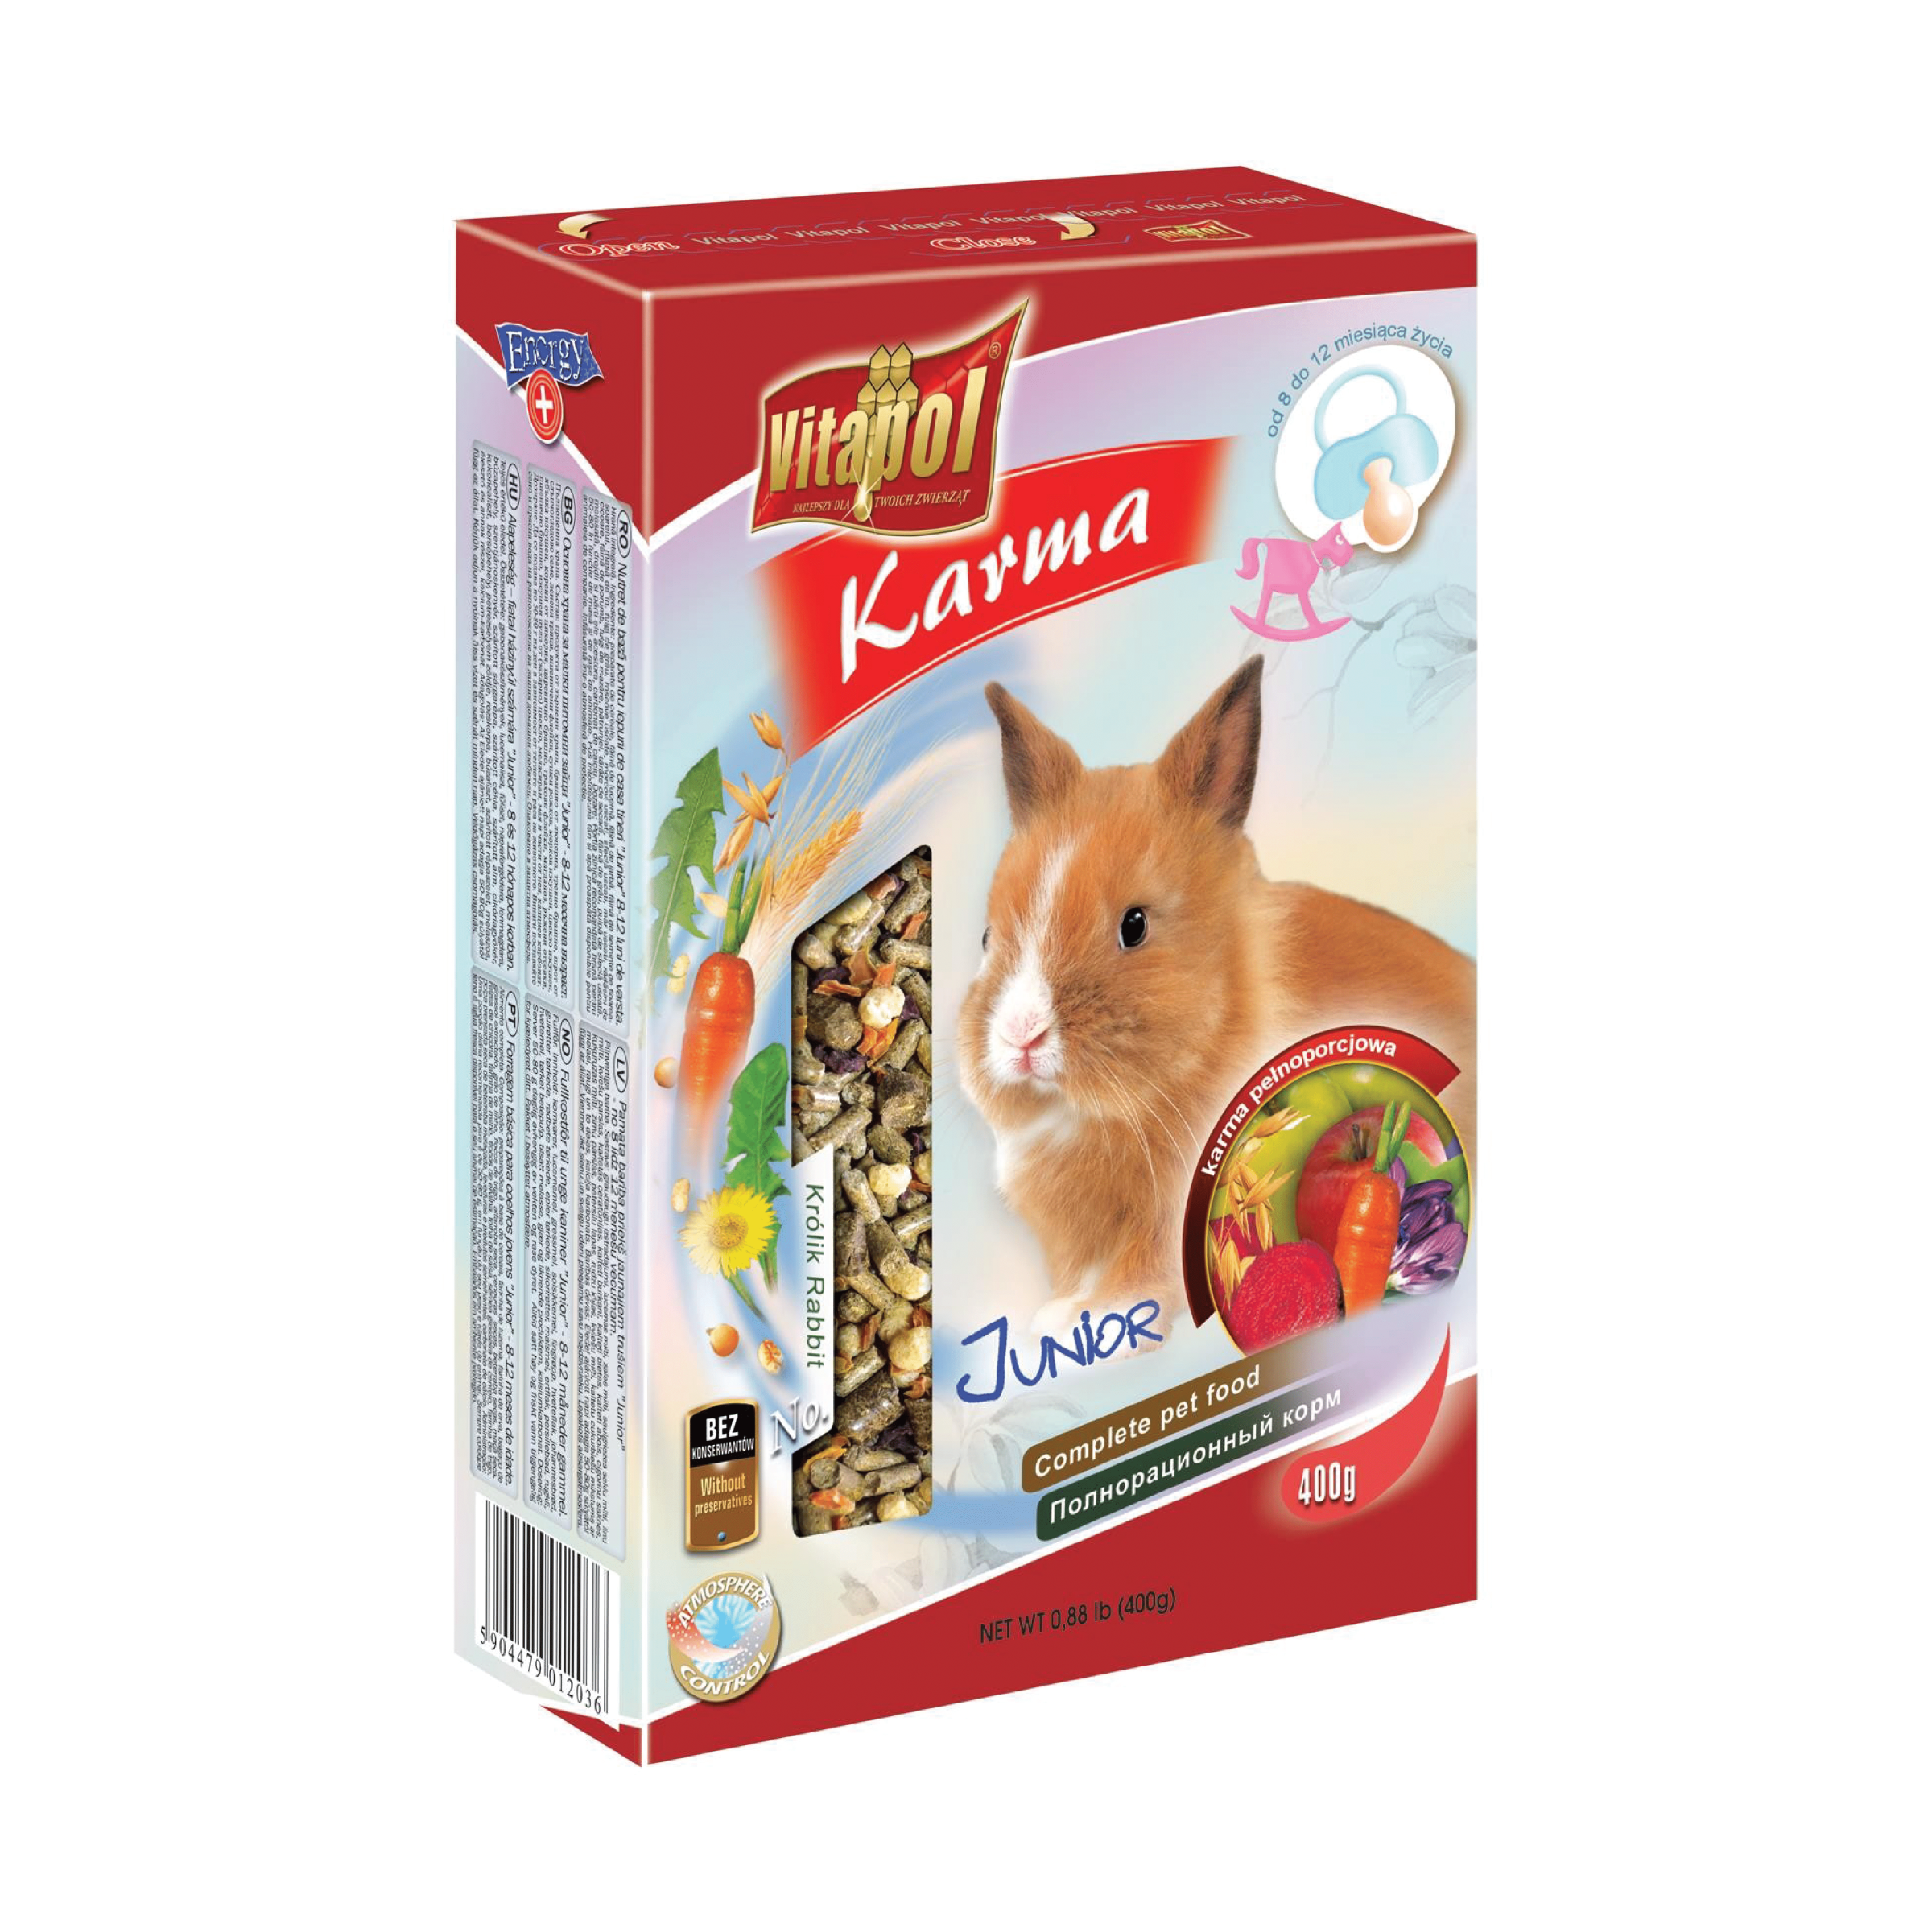 Vitapol Complete Junior Food For Young Rabbits 400g (Pack of 2)